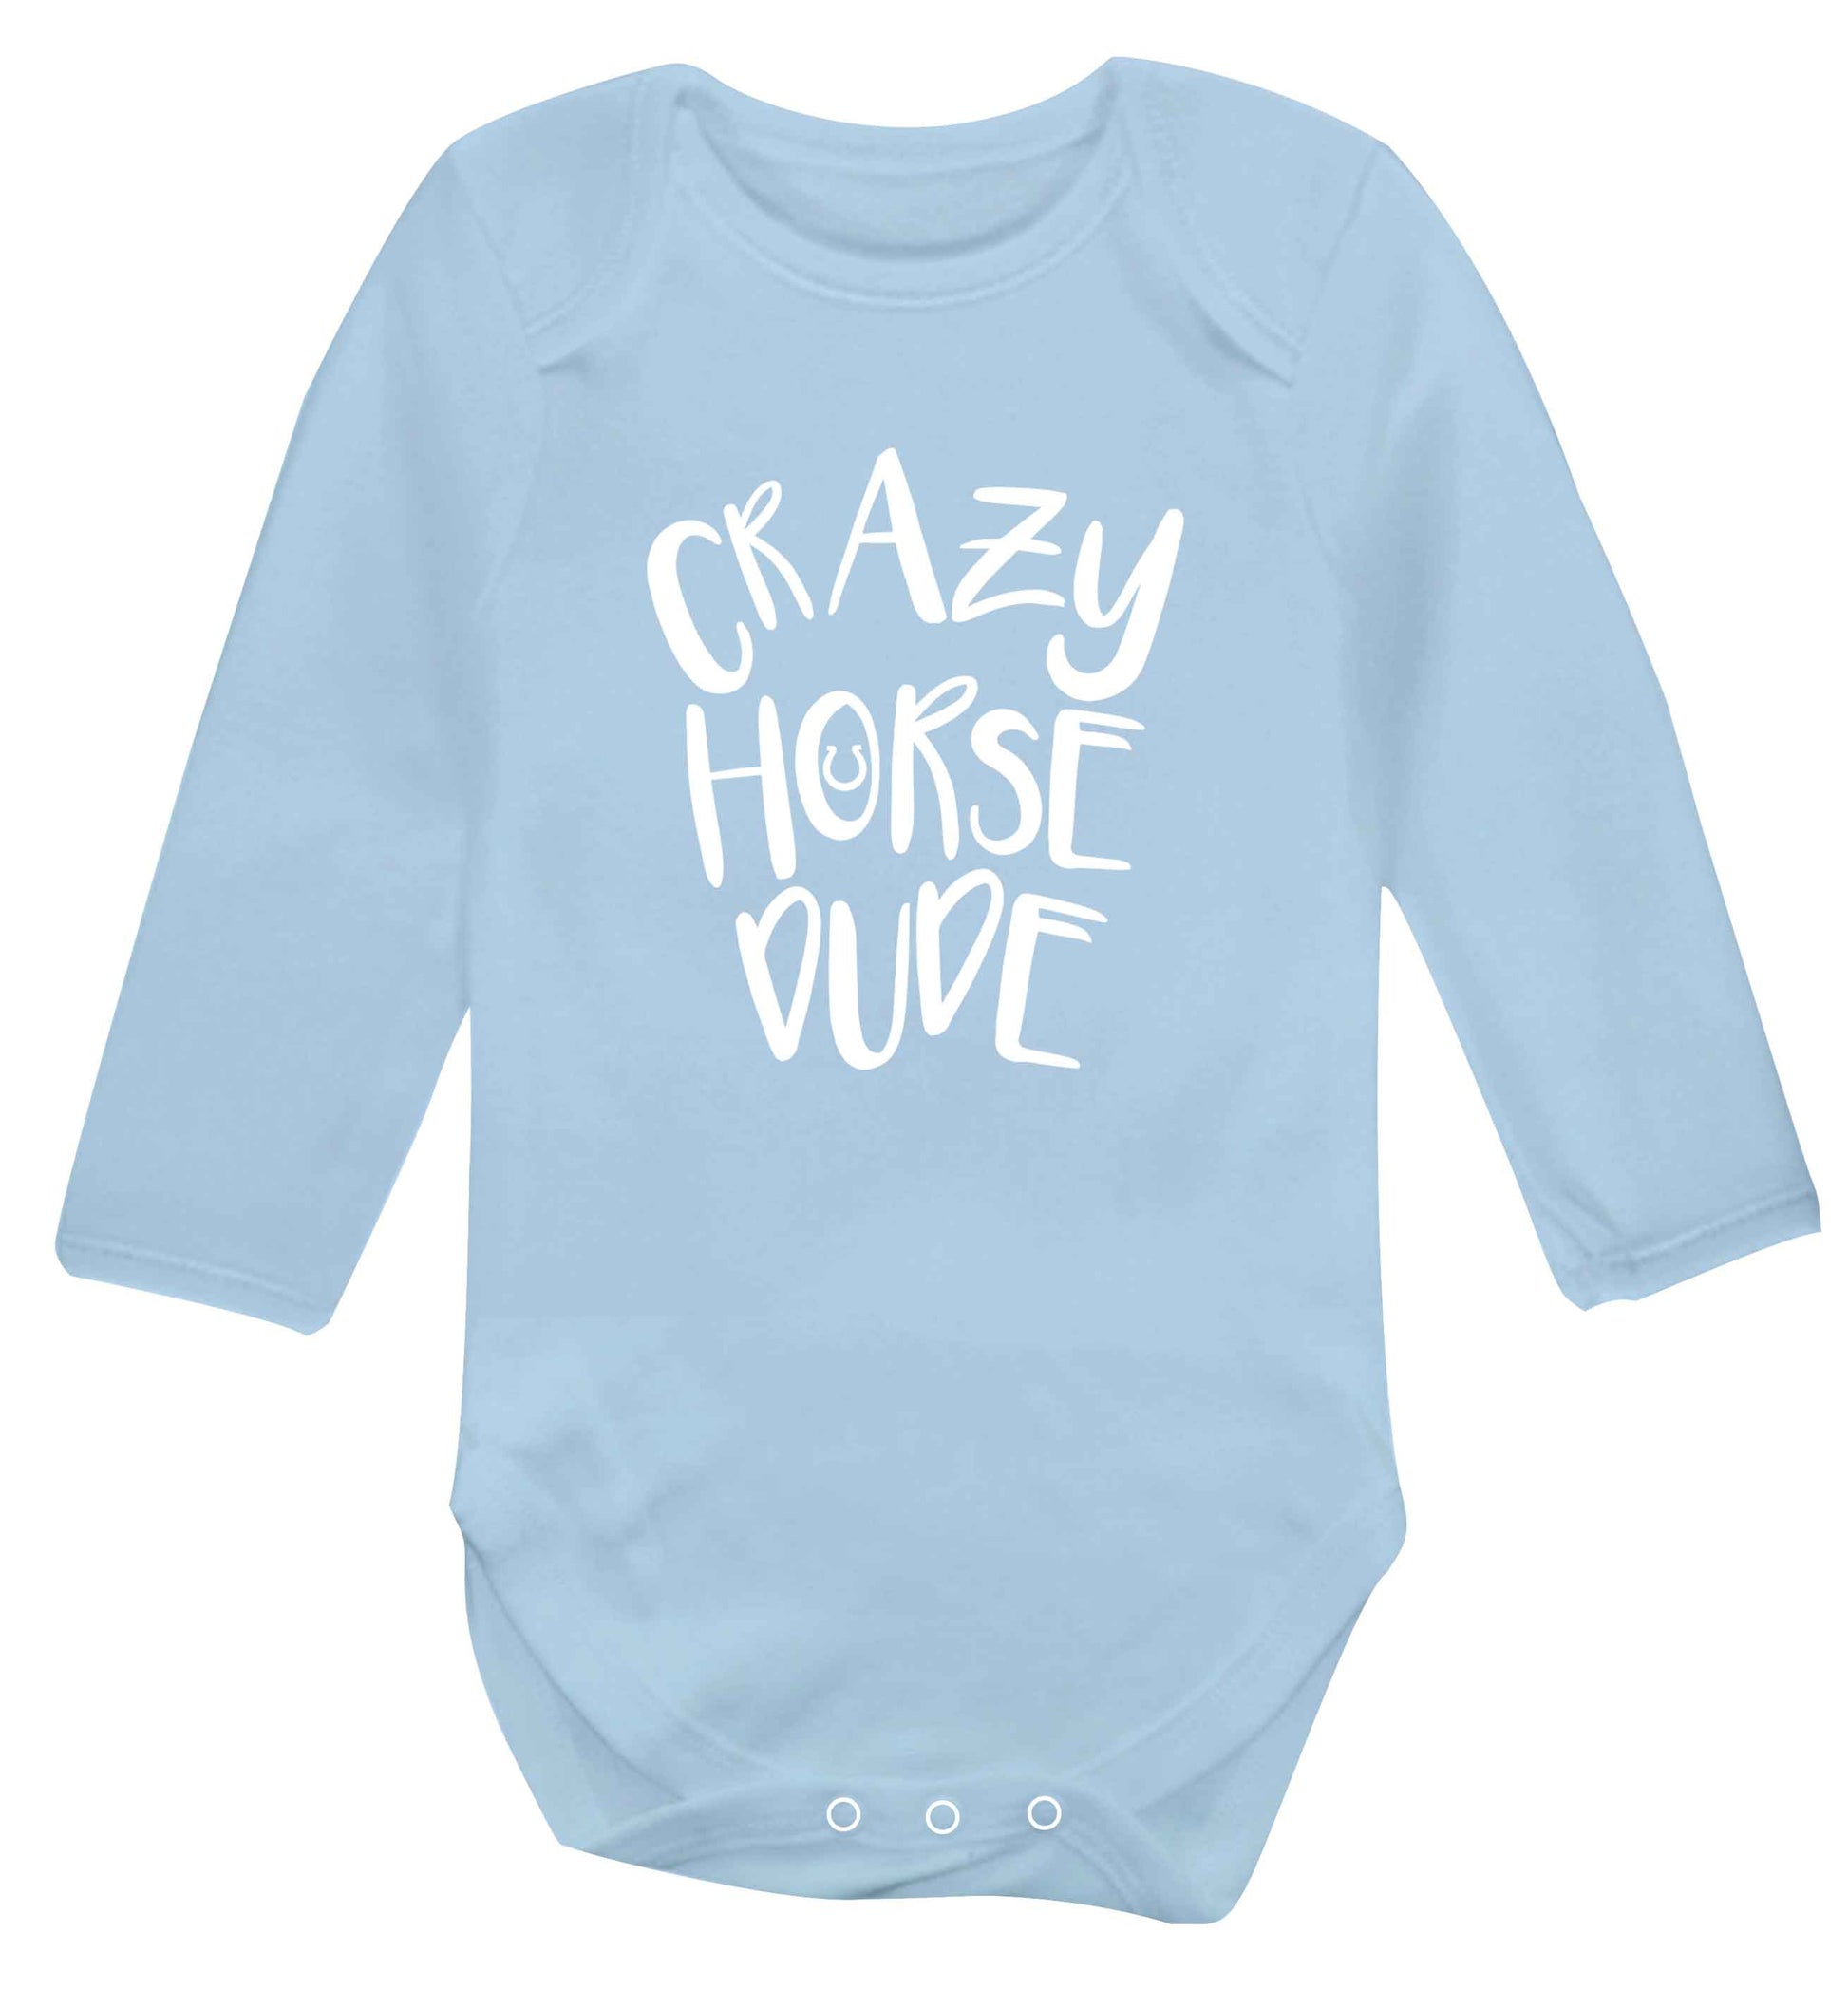 Crazy horse dude baby vest long sleeved pale blue 6-12 months